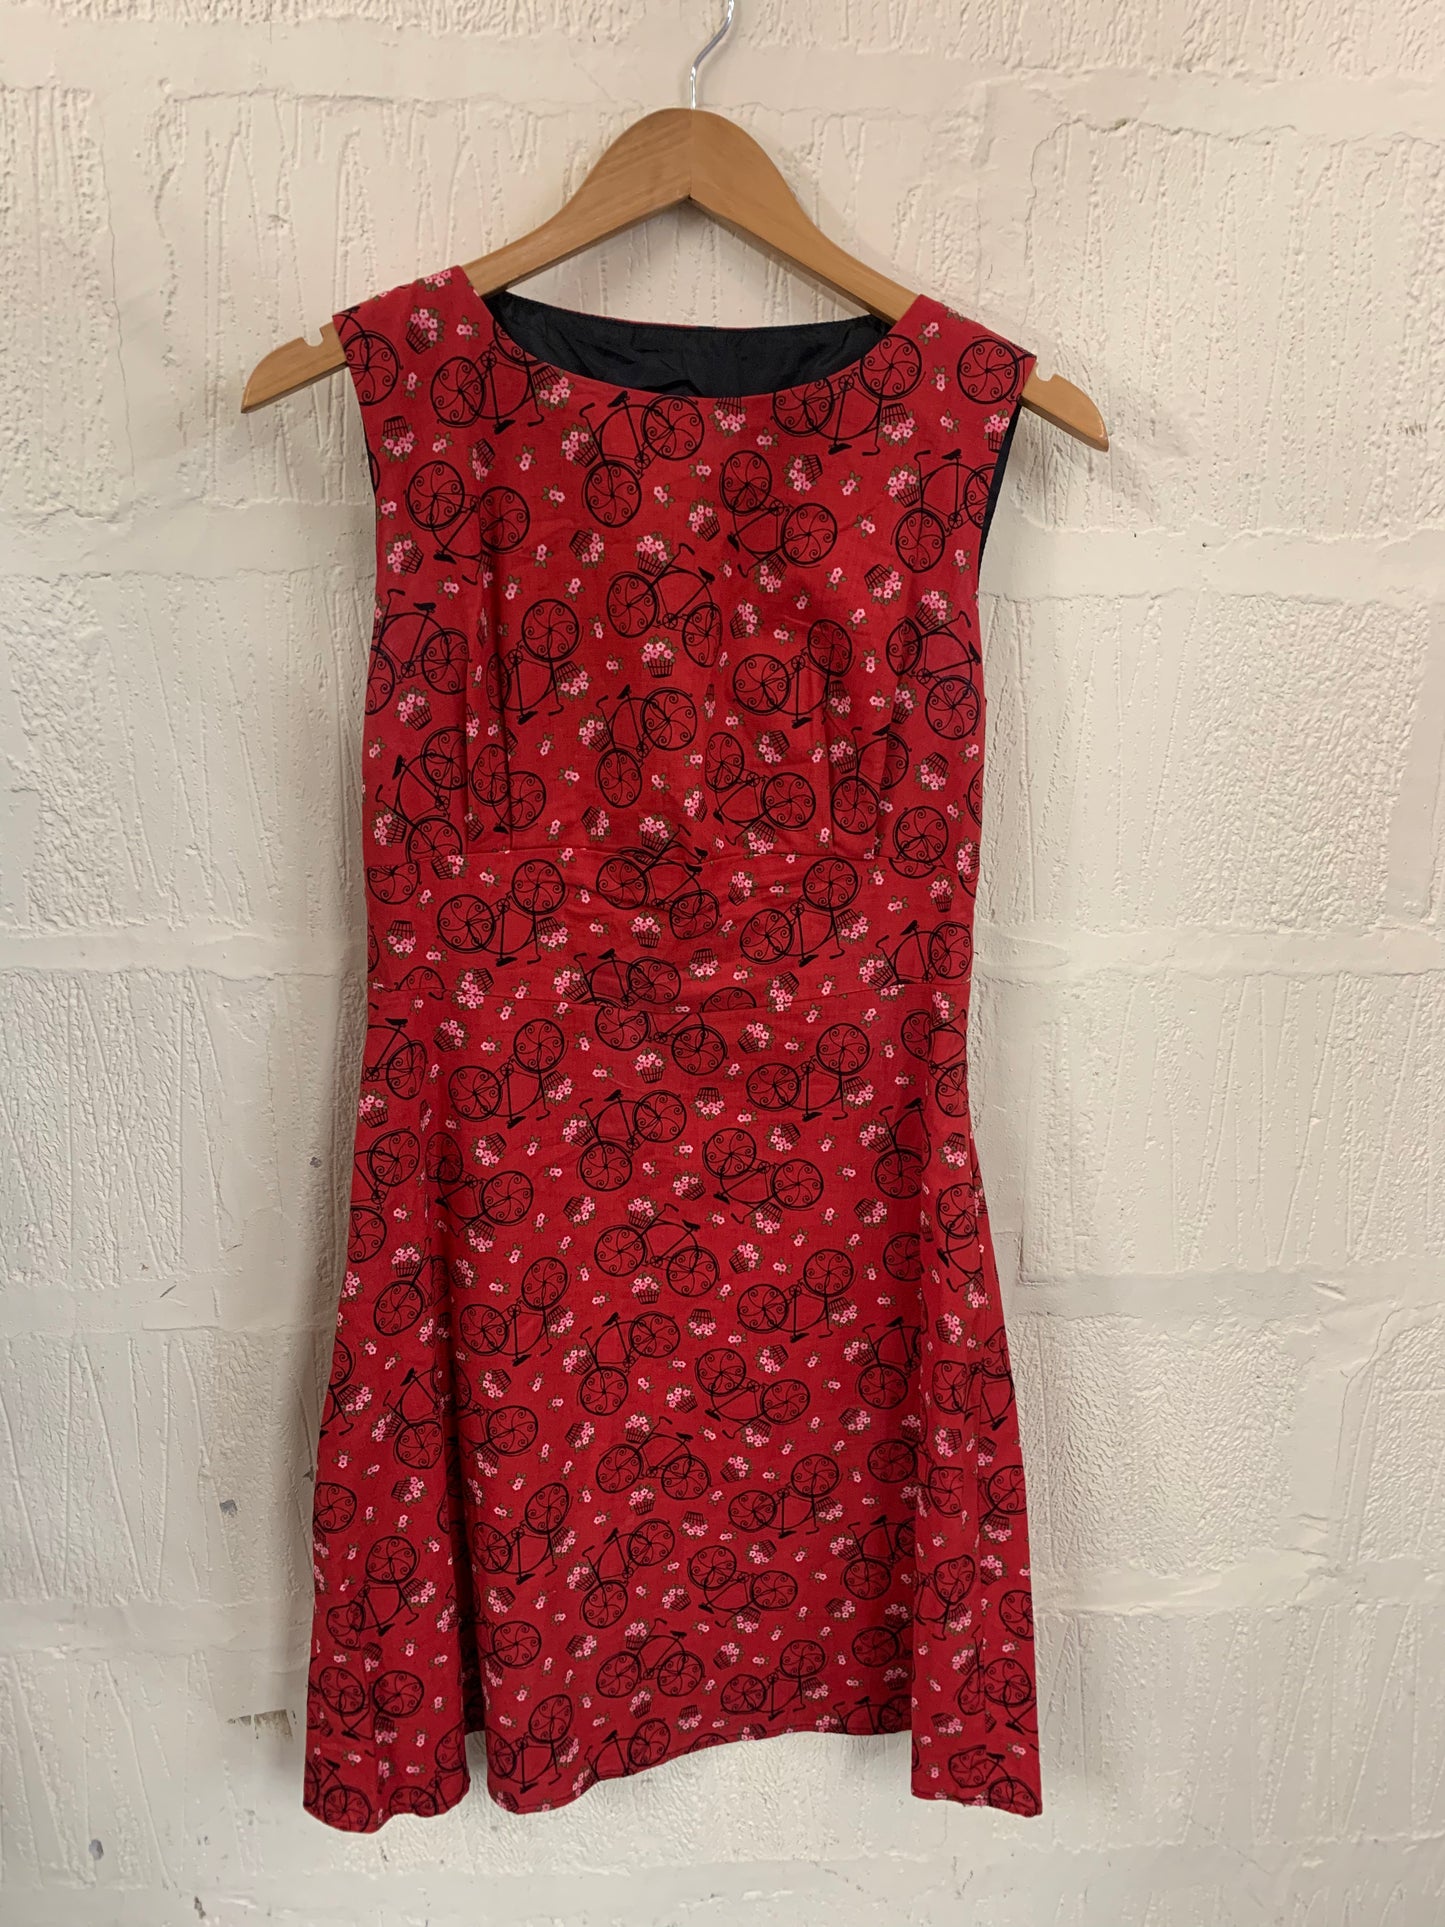 1950s Style Get Cutie Sleeveless Red Printed with Bicycle Dress  Size 12